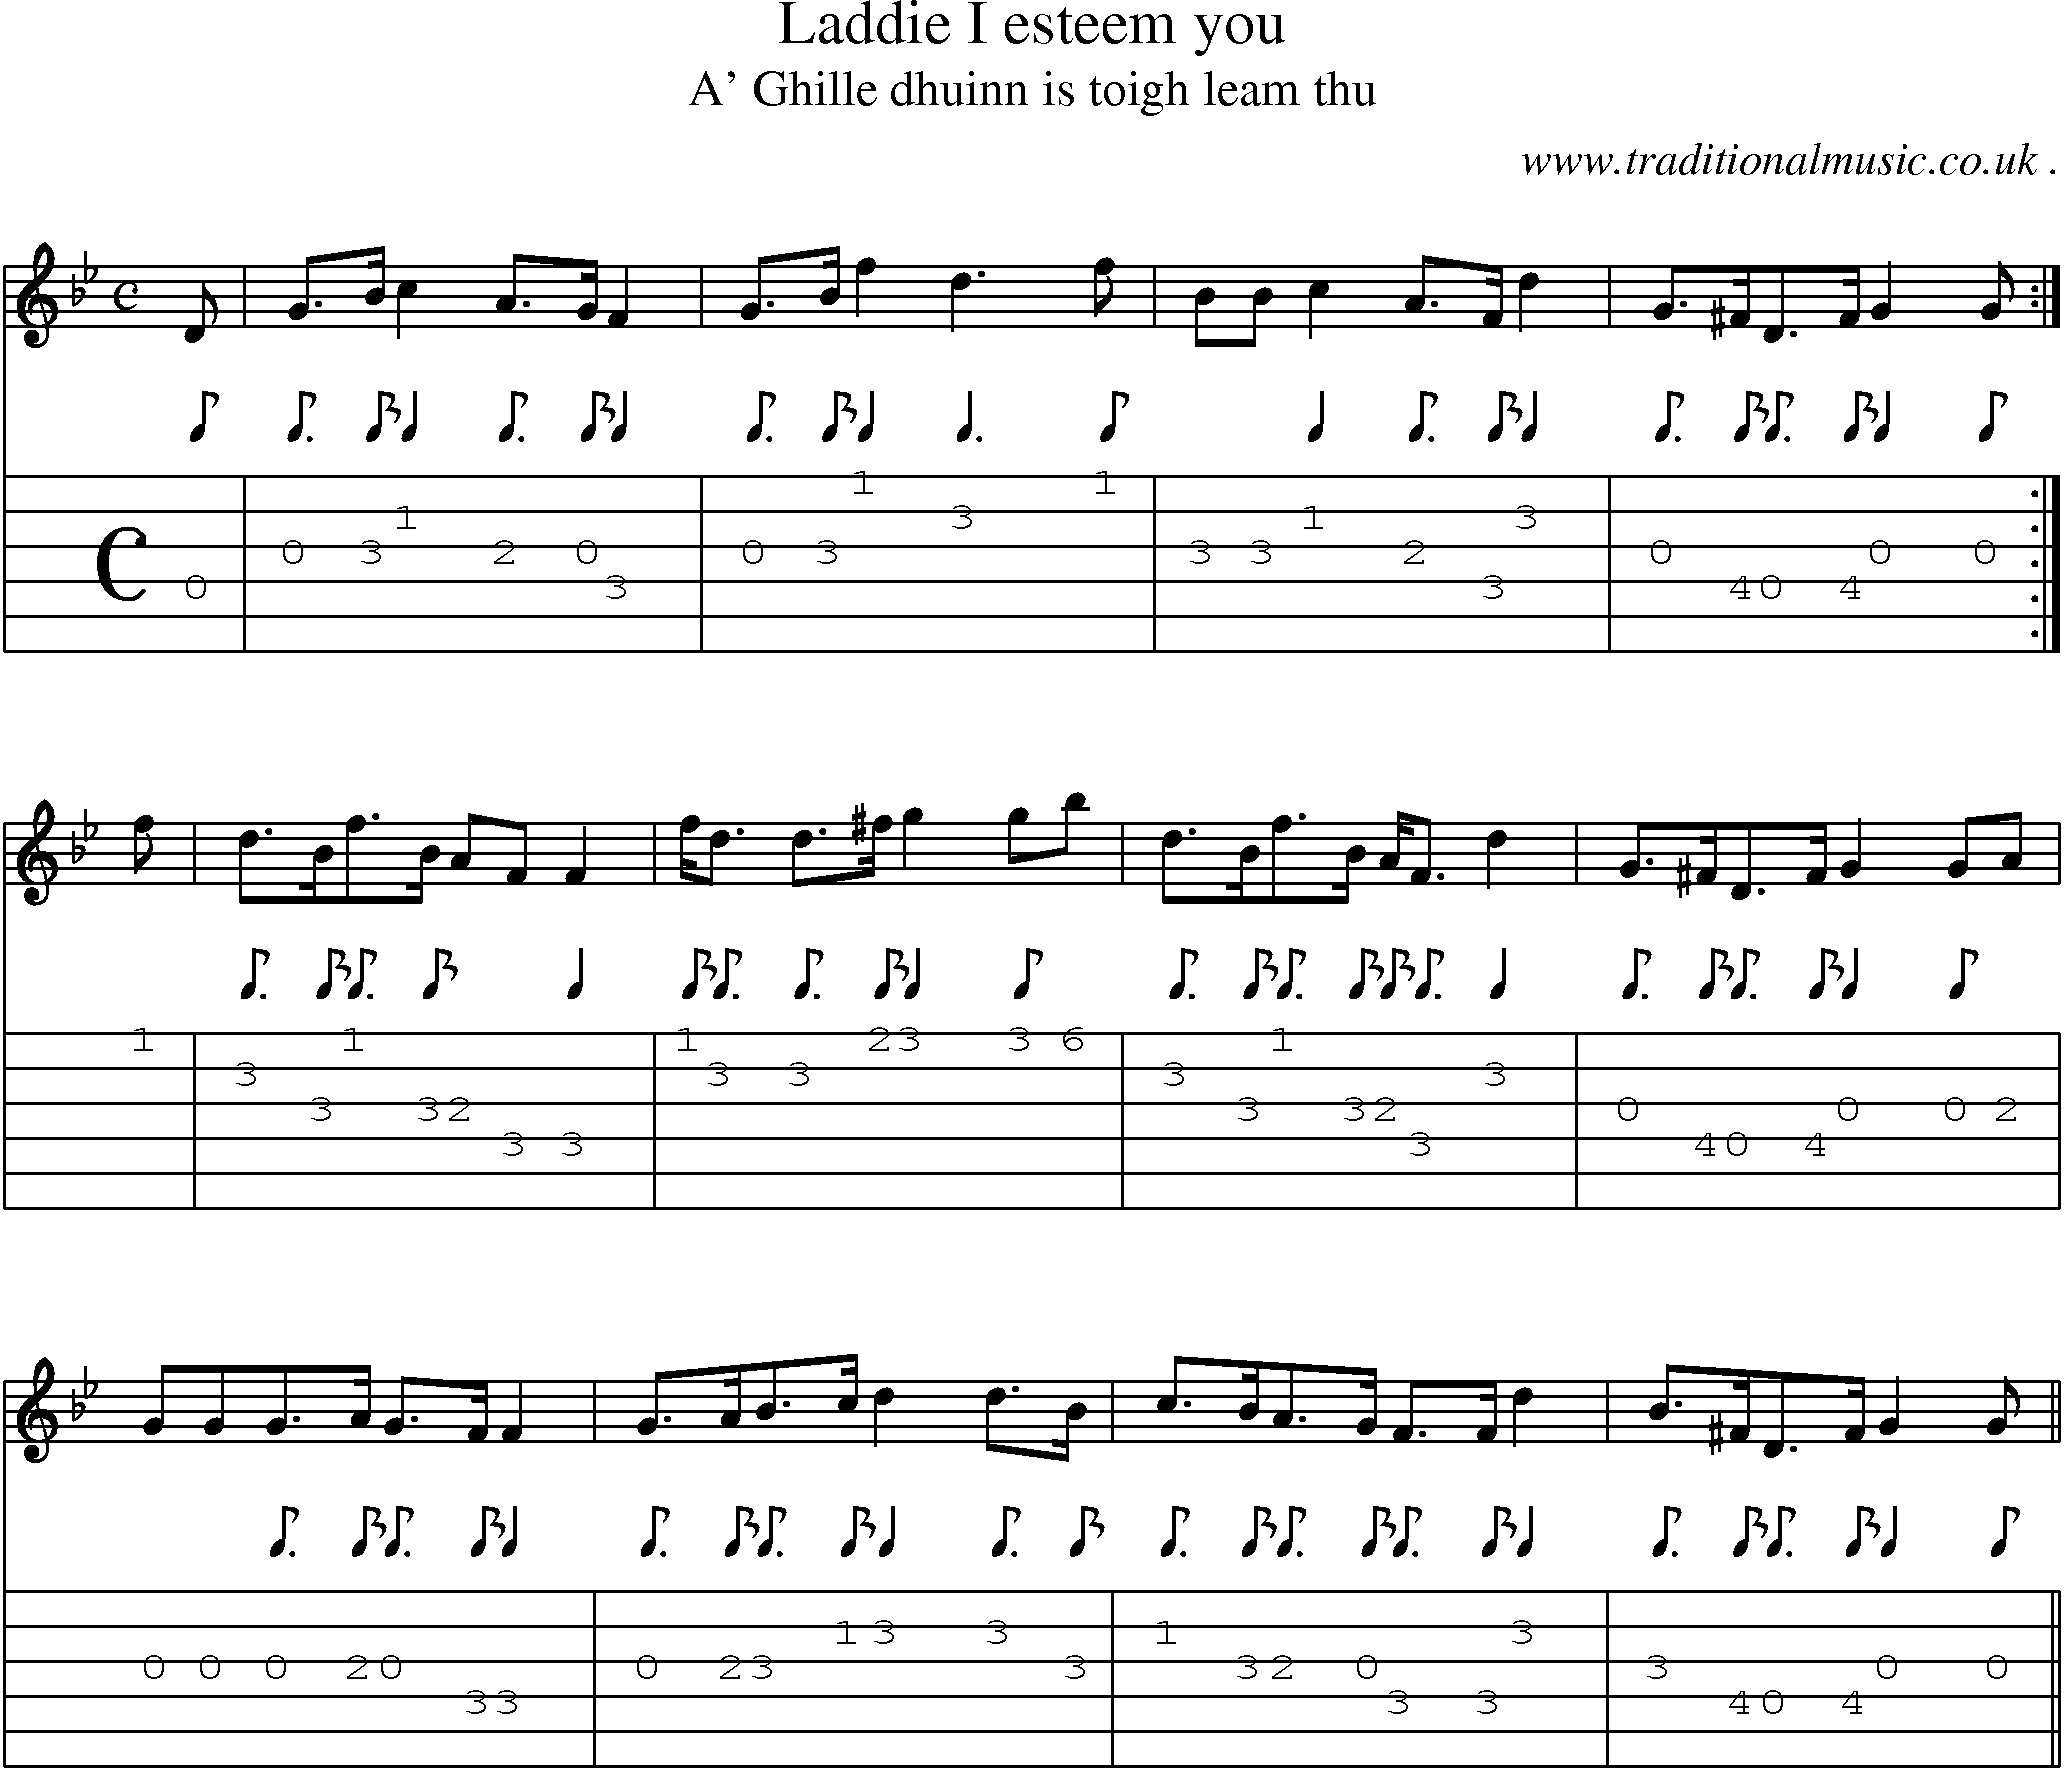 Sheet-music  score, Chords and Guitar Tabs for Laddie I Esteem You